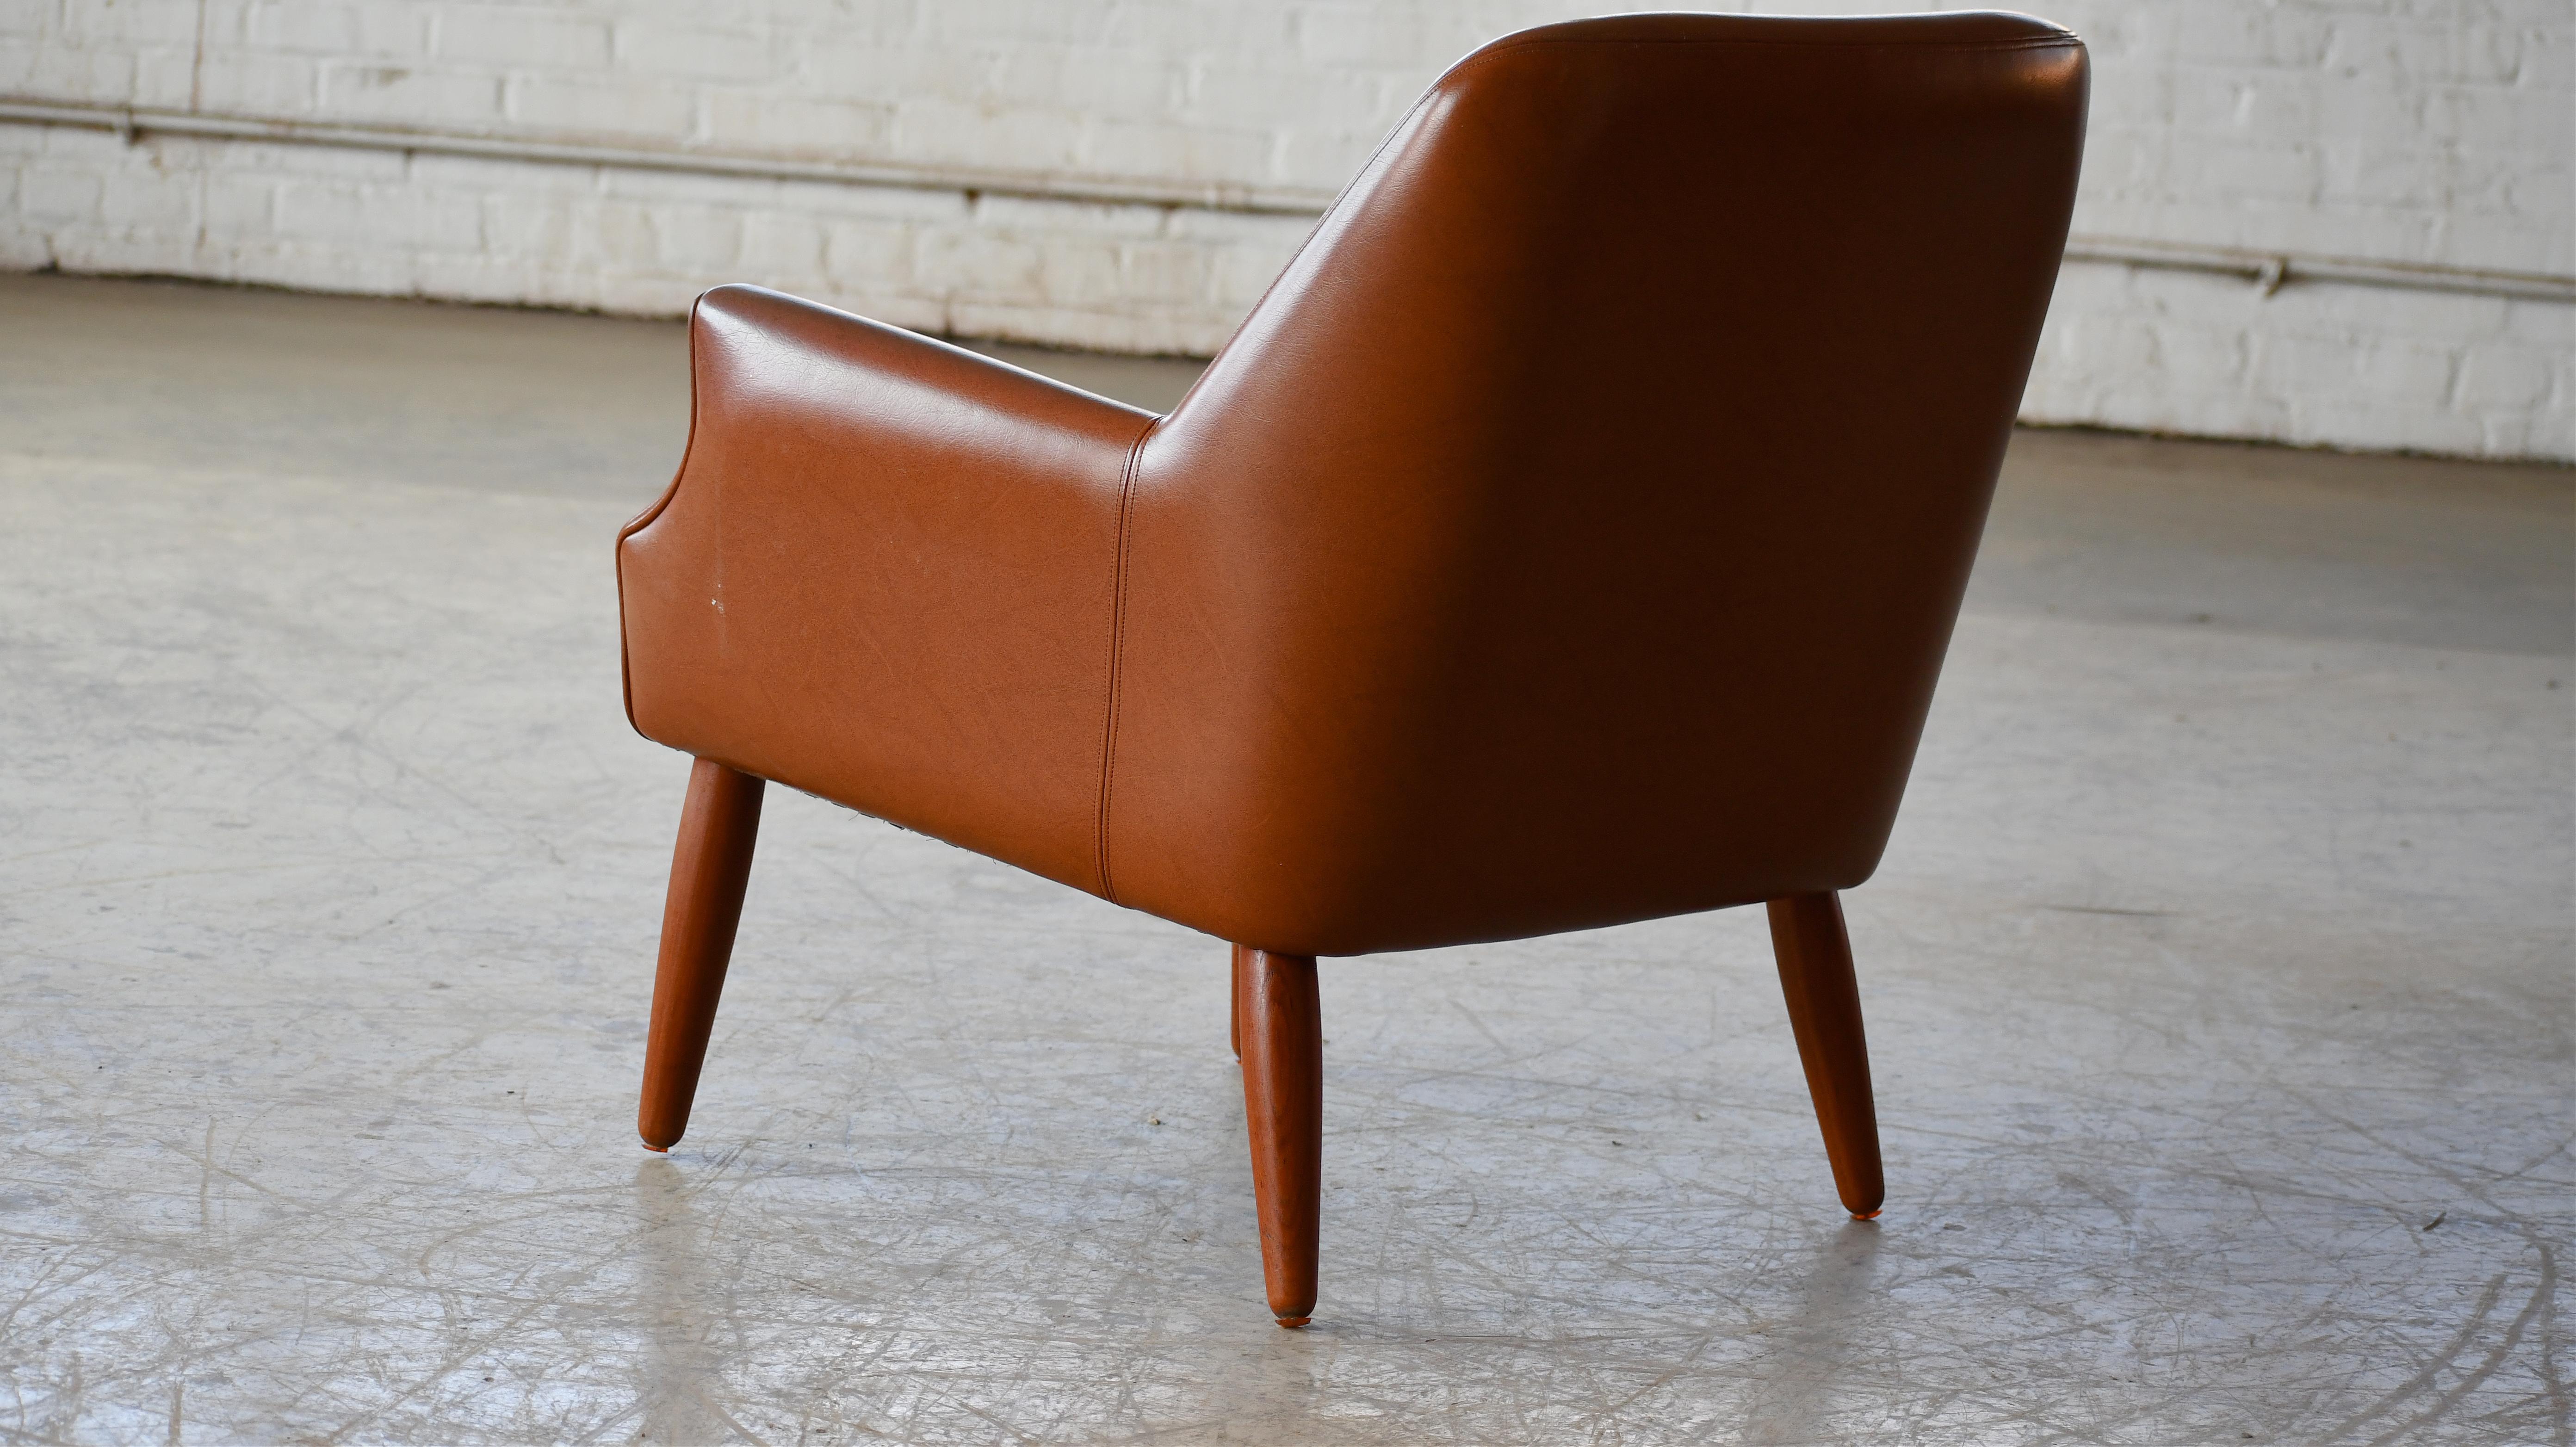 Danish Midcentury Space Age Lounge Chair in Teak and Naugahyde For Sale 1